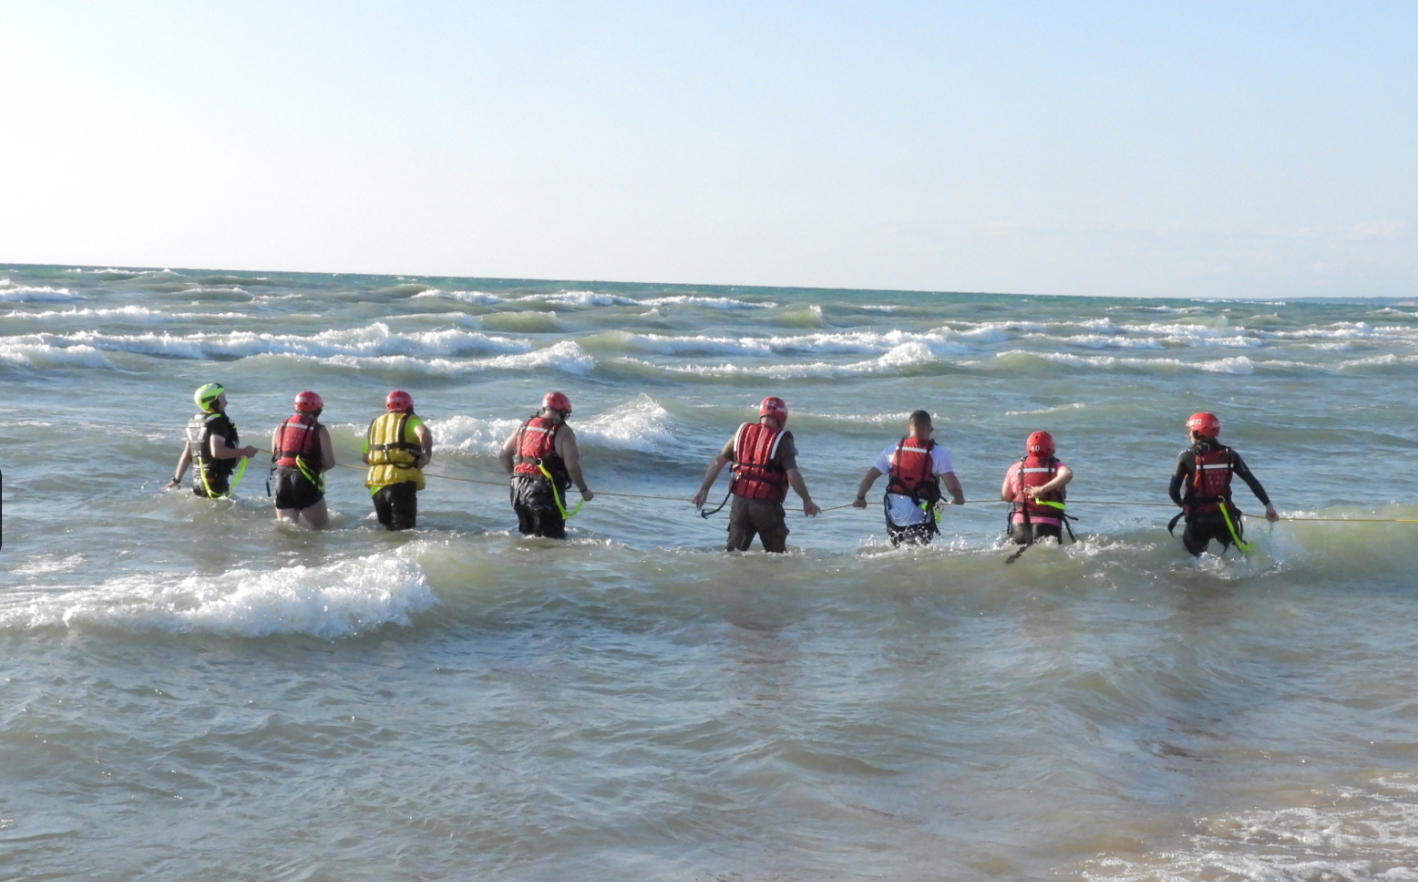 Emergency responders search the water at North Beach on Lake Michigan